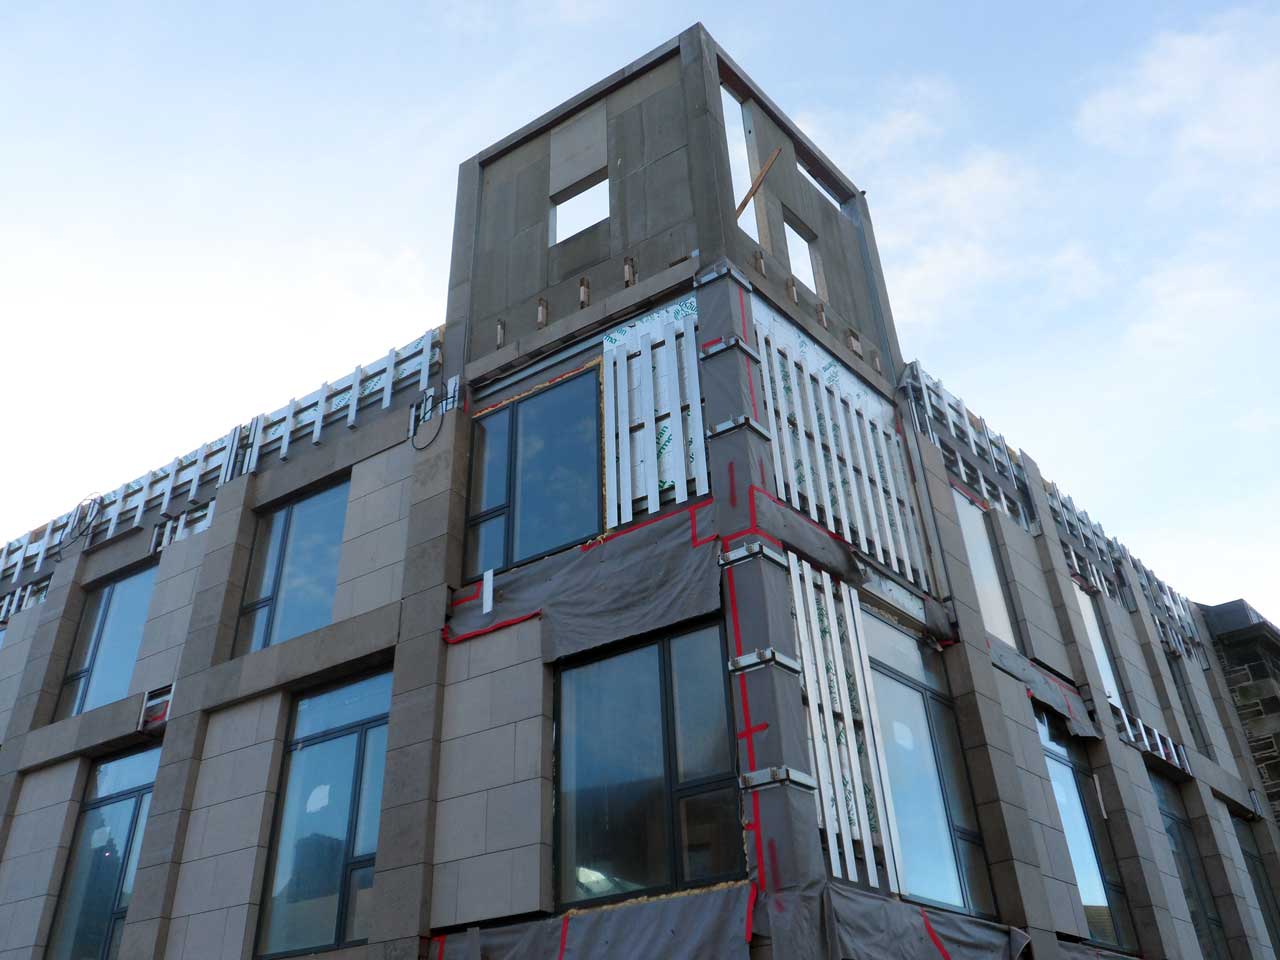 Photo: Wick Council Offices 4 January 2015